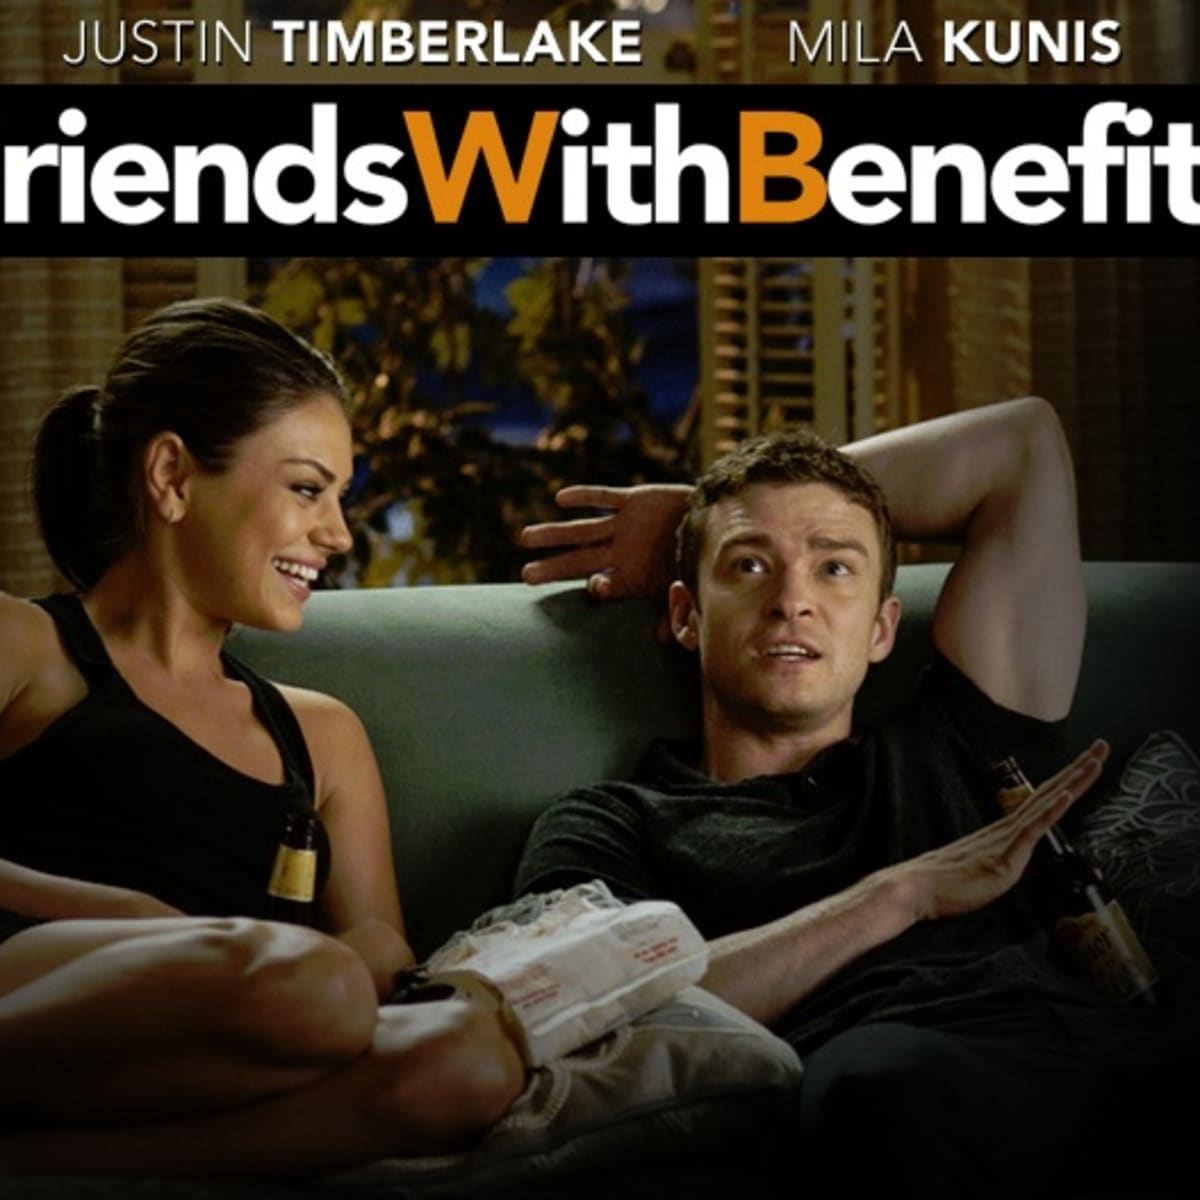 Movies Like Friends With Benefits